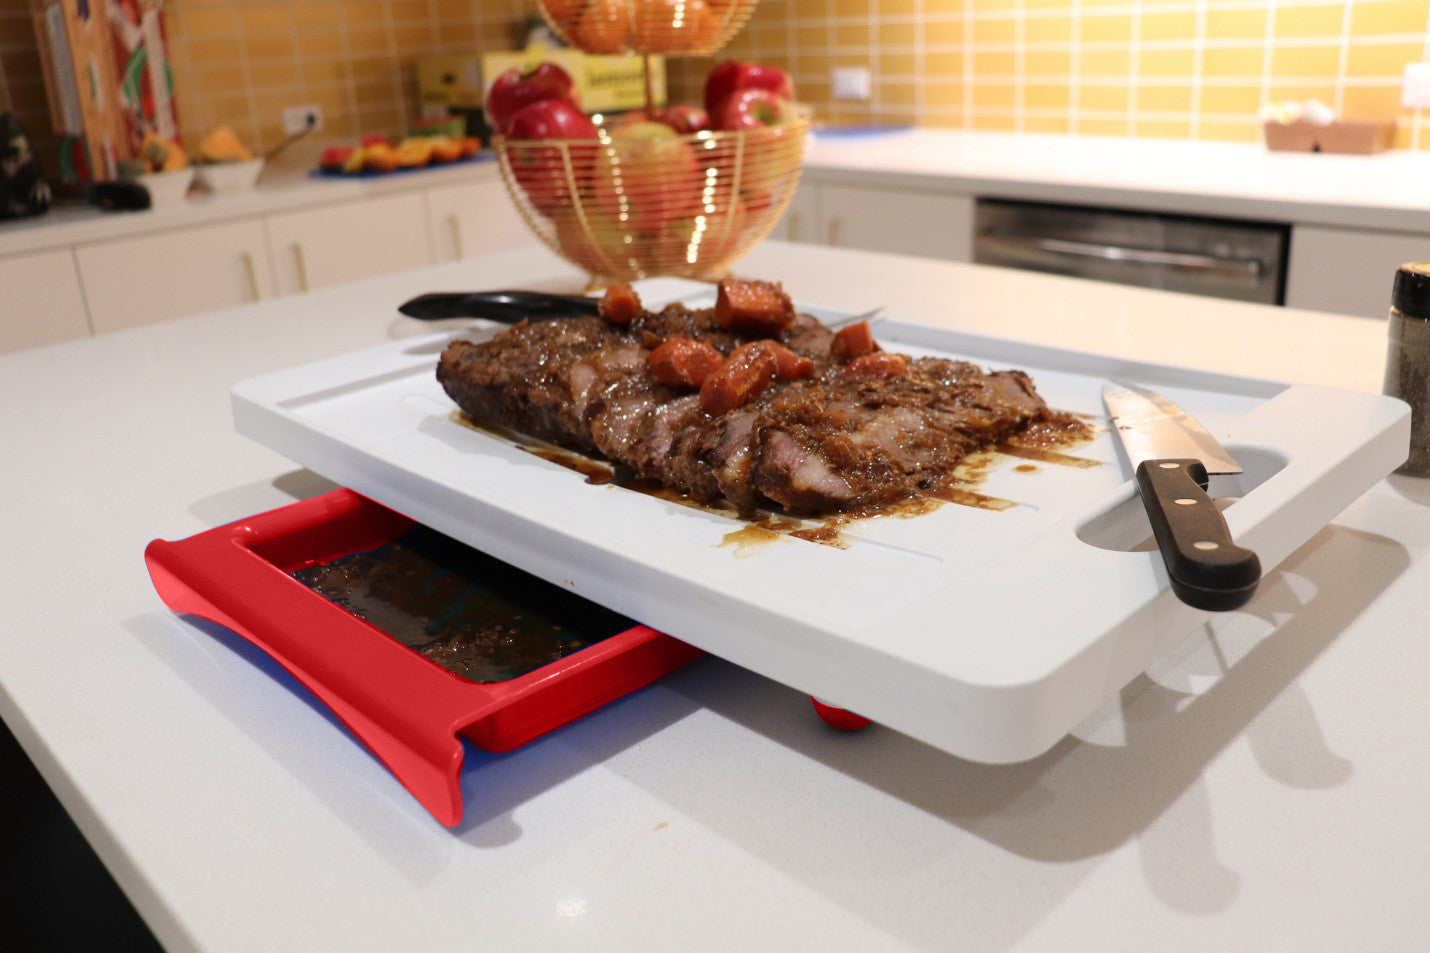 Dripless Cutting Board 2 In 1 System With Digital Meat Thermometer